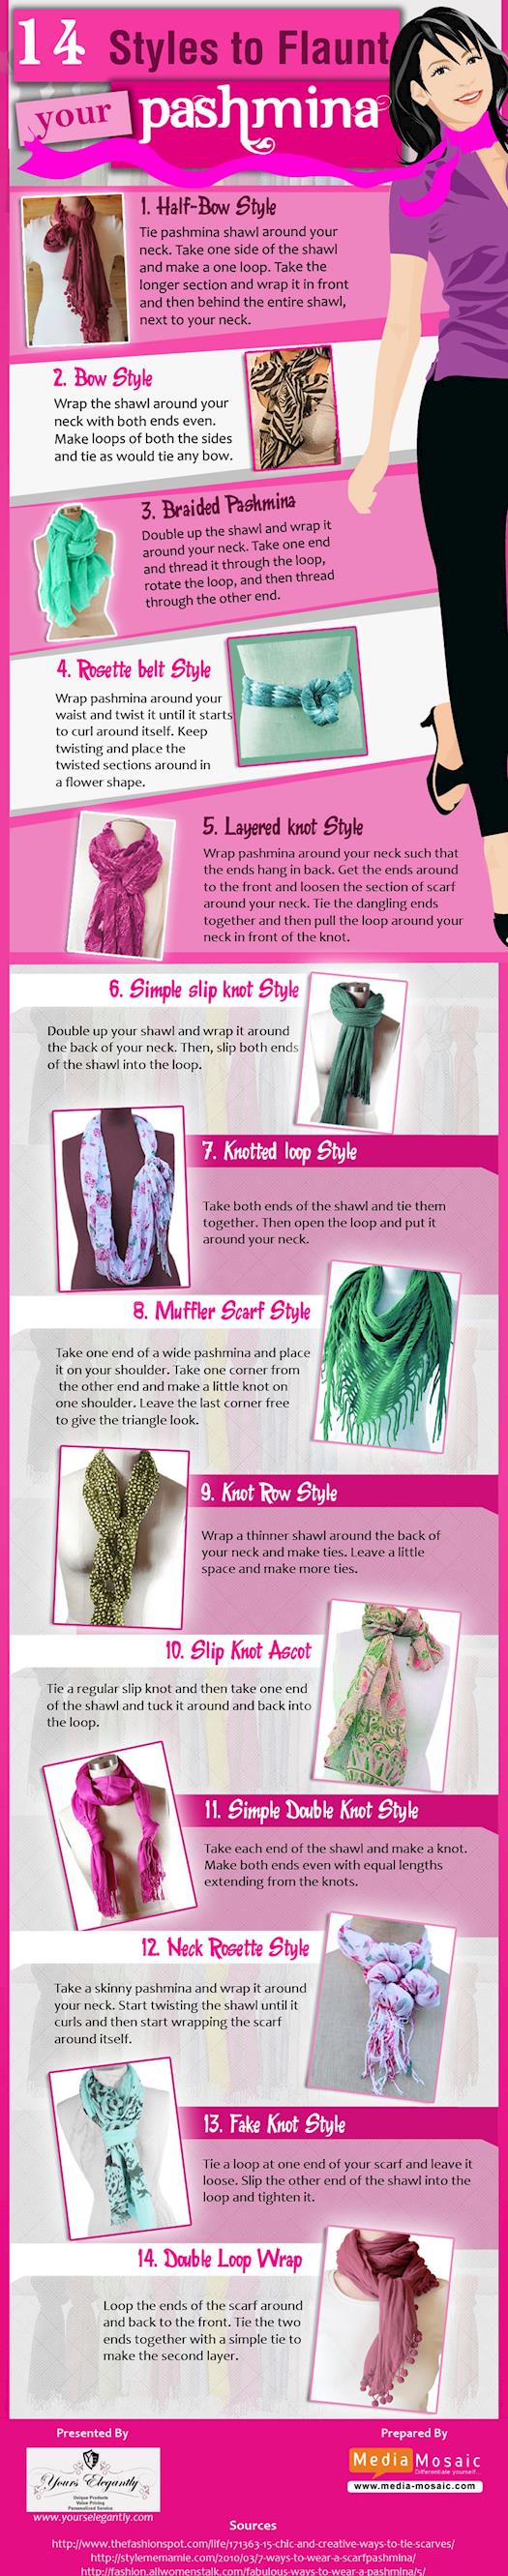 14 Styles to Flaunt your Pashmina [Infographic]